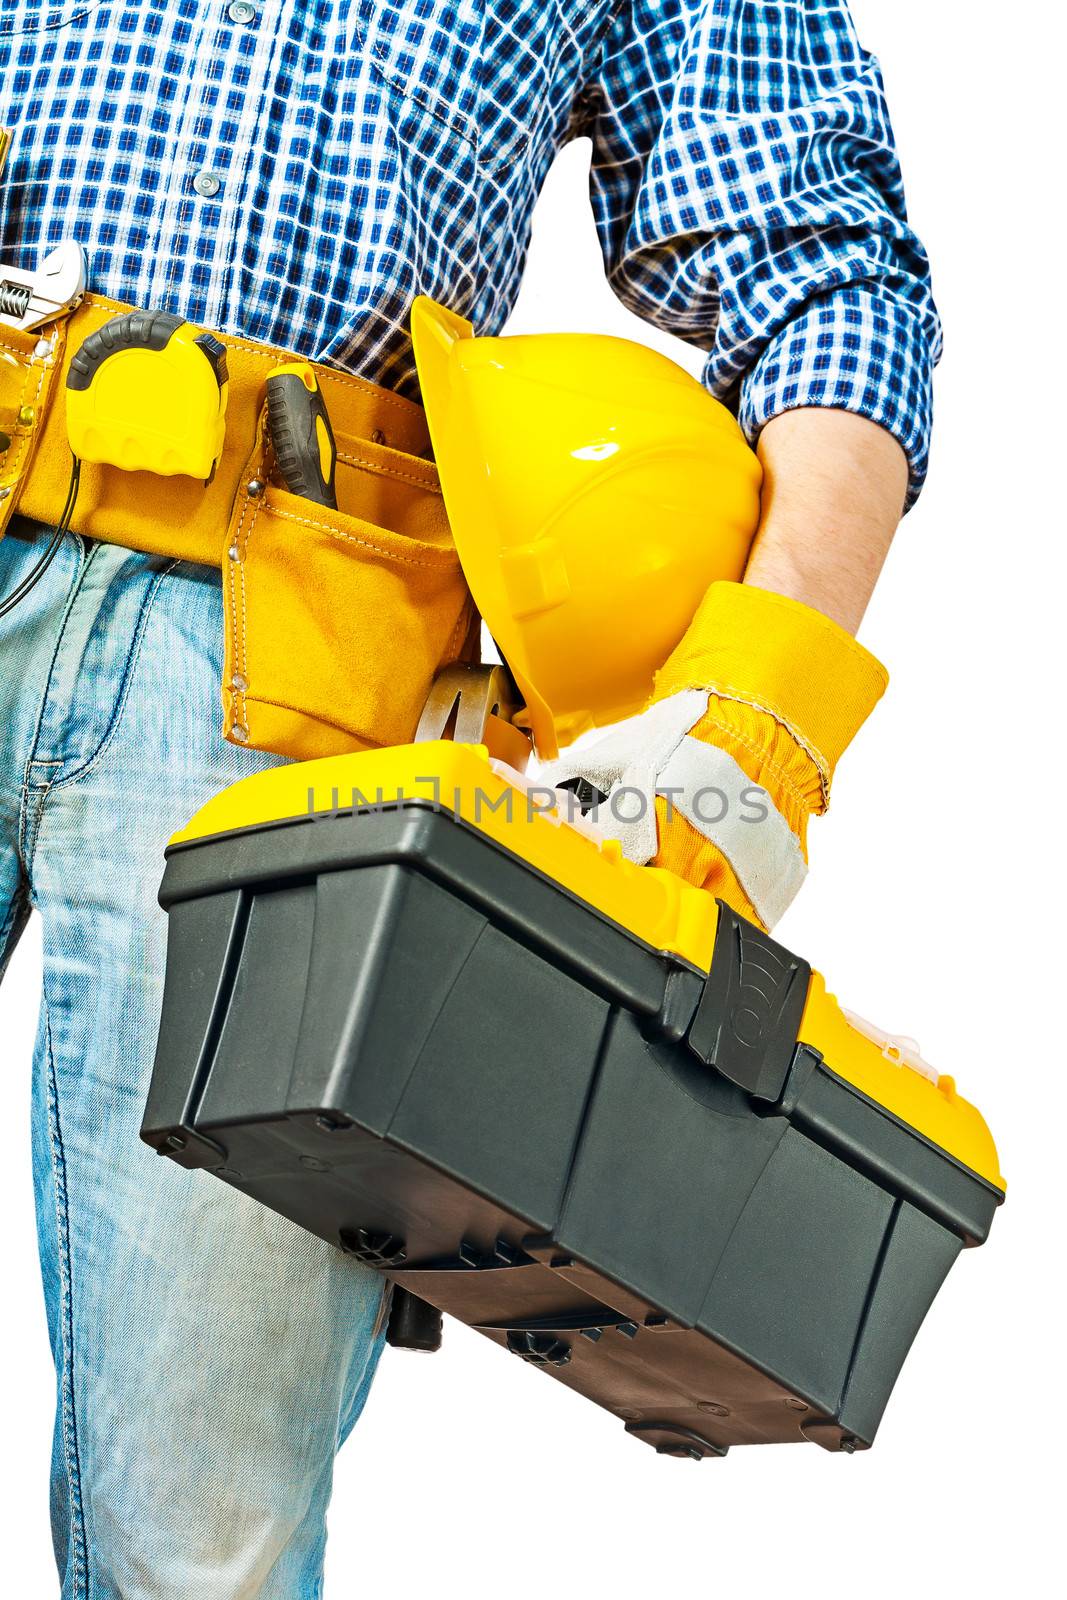 toolbox in hand of worker